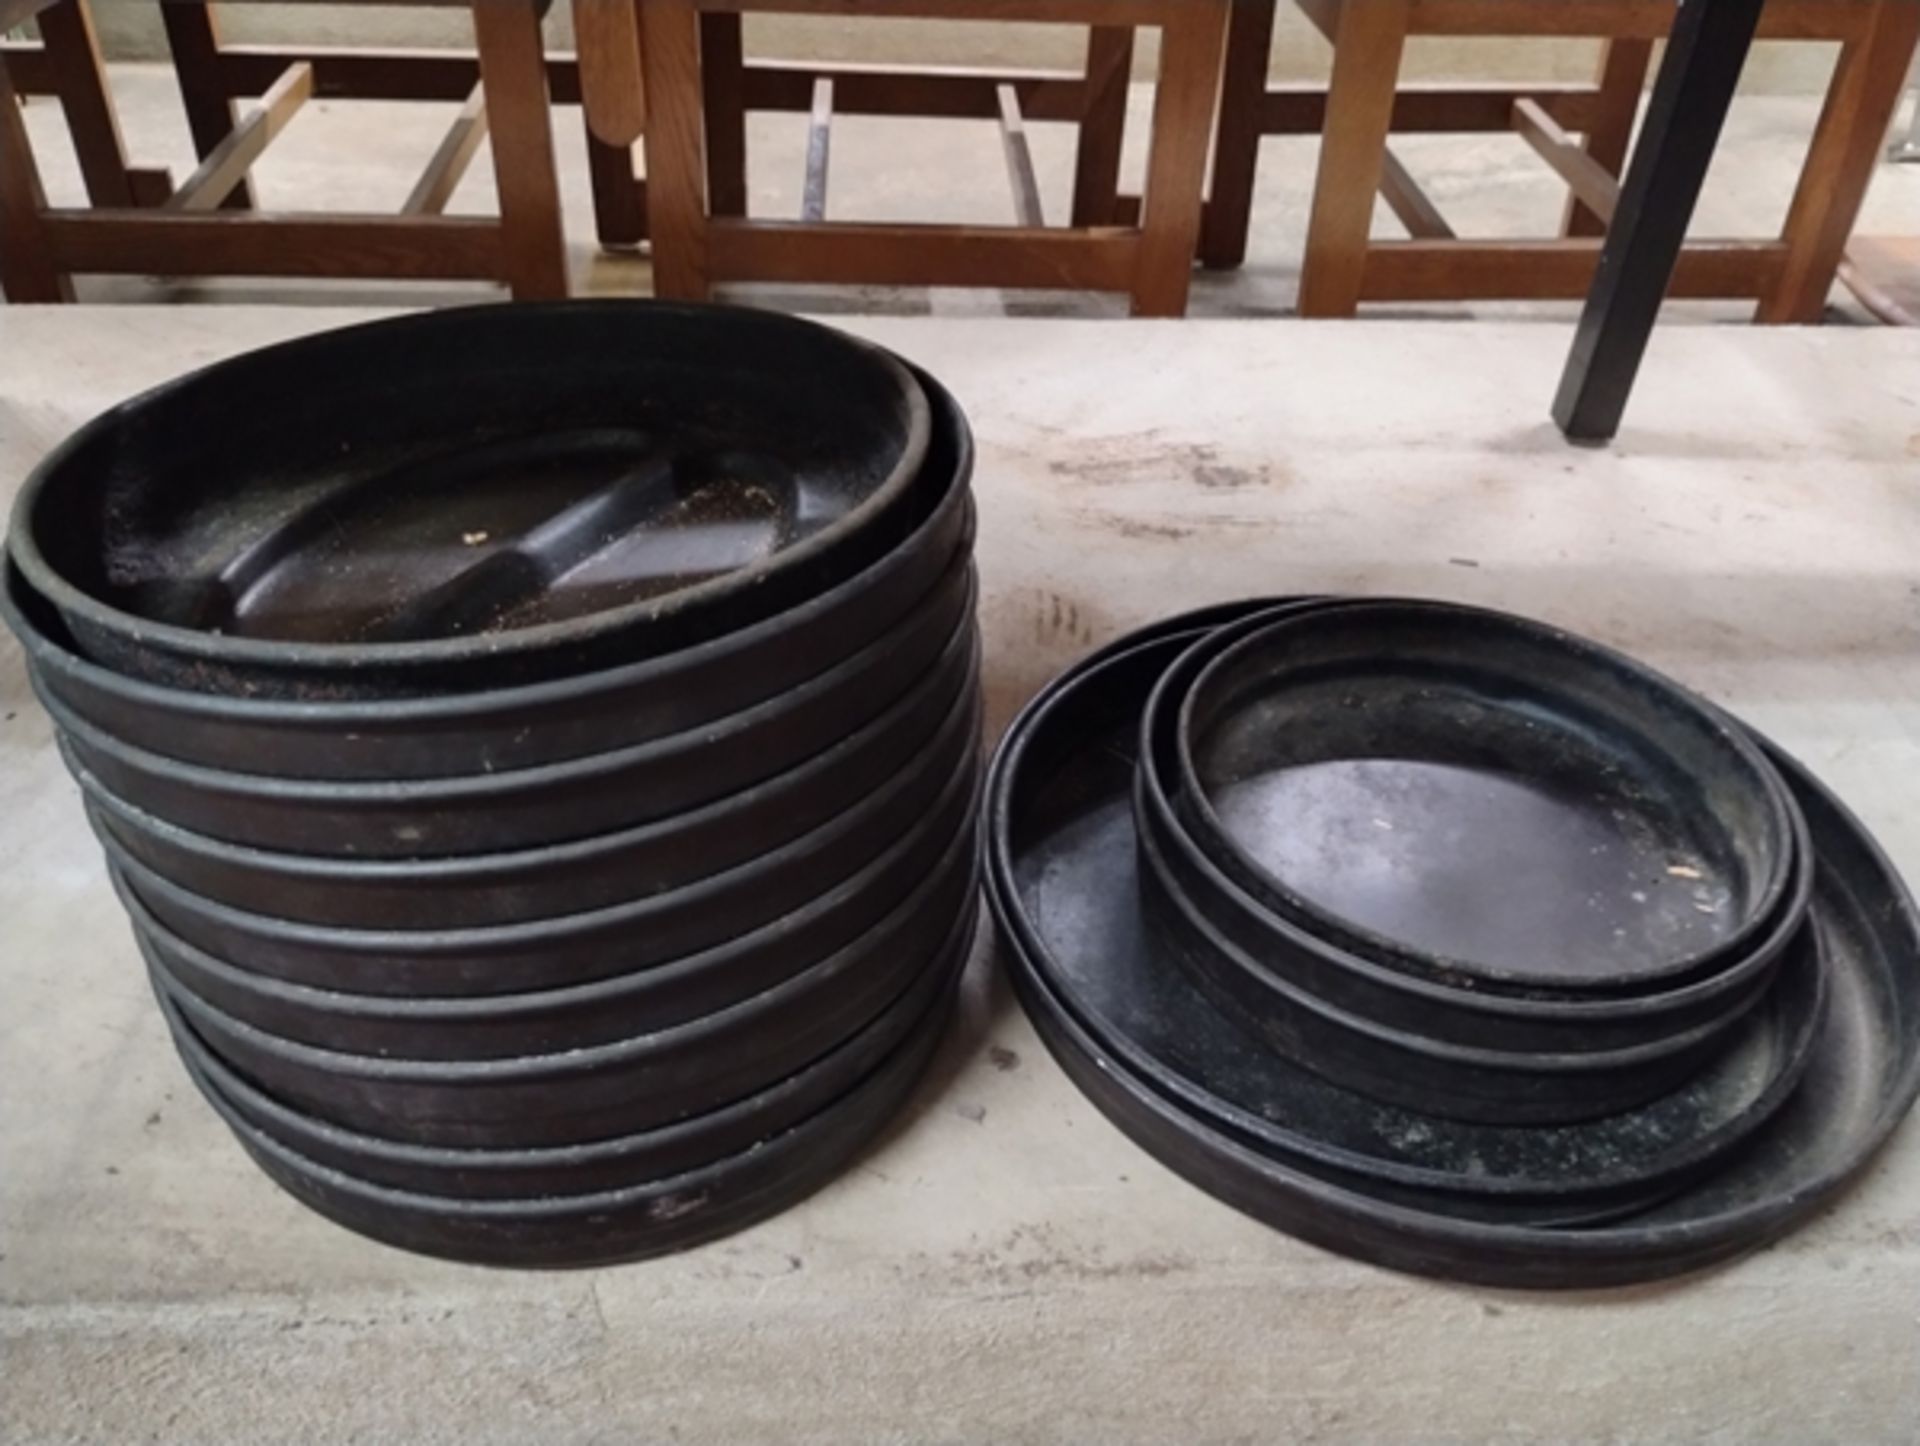 14 ASSORTED SIZES ROUND PANS 10" - 16"